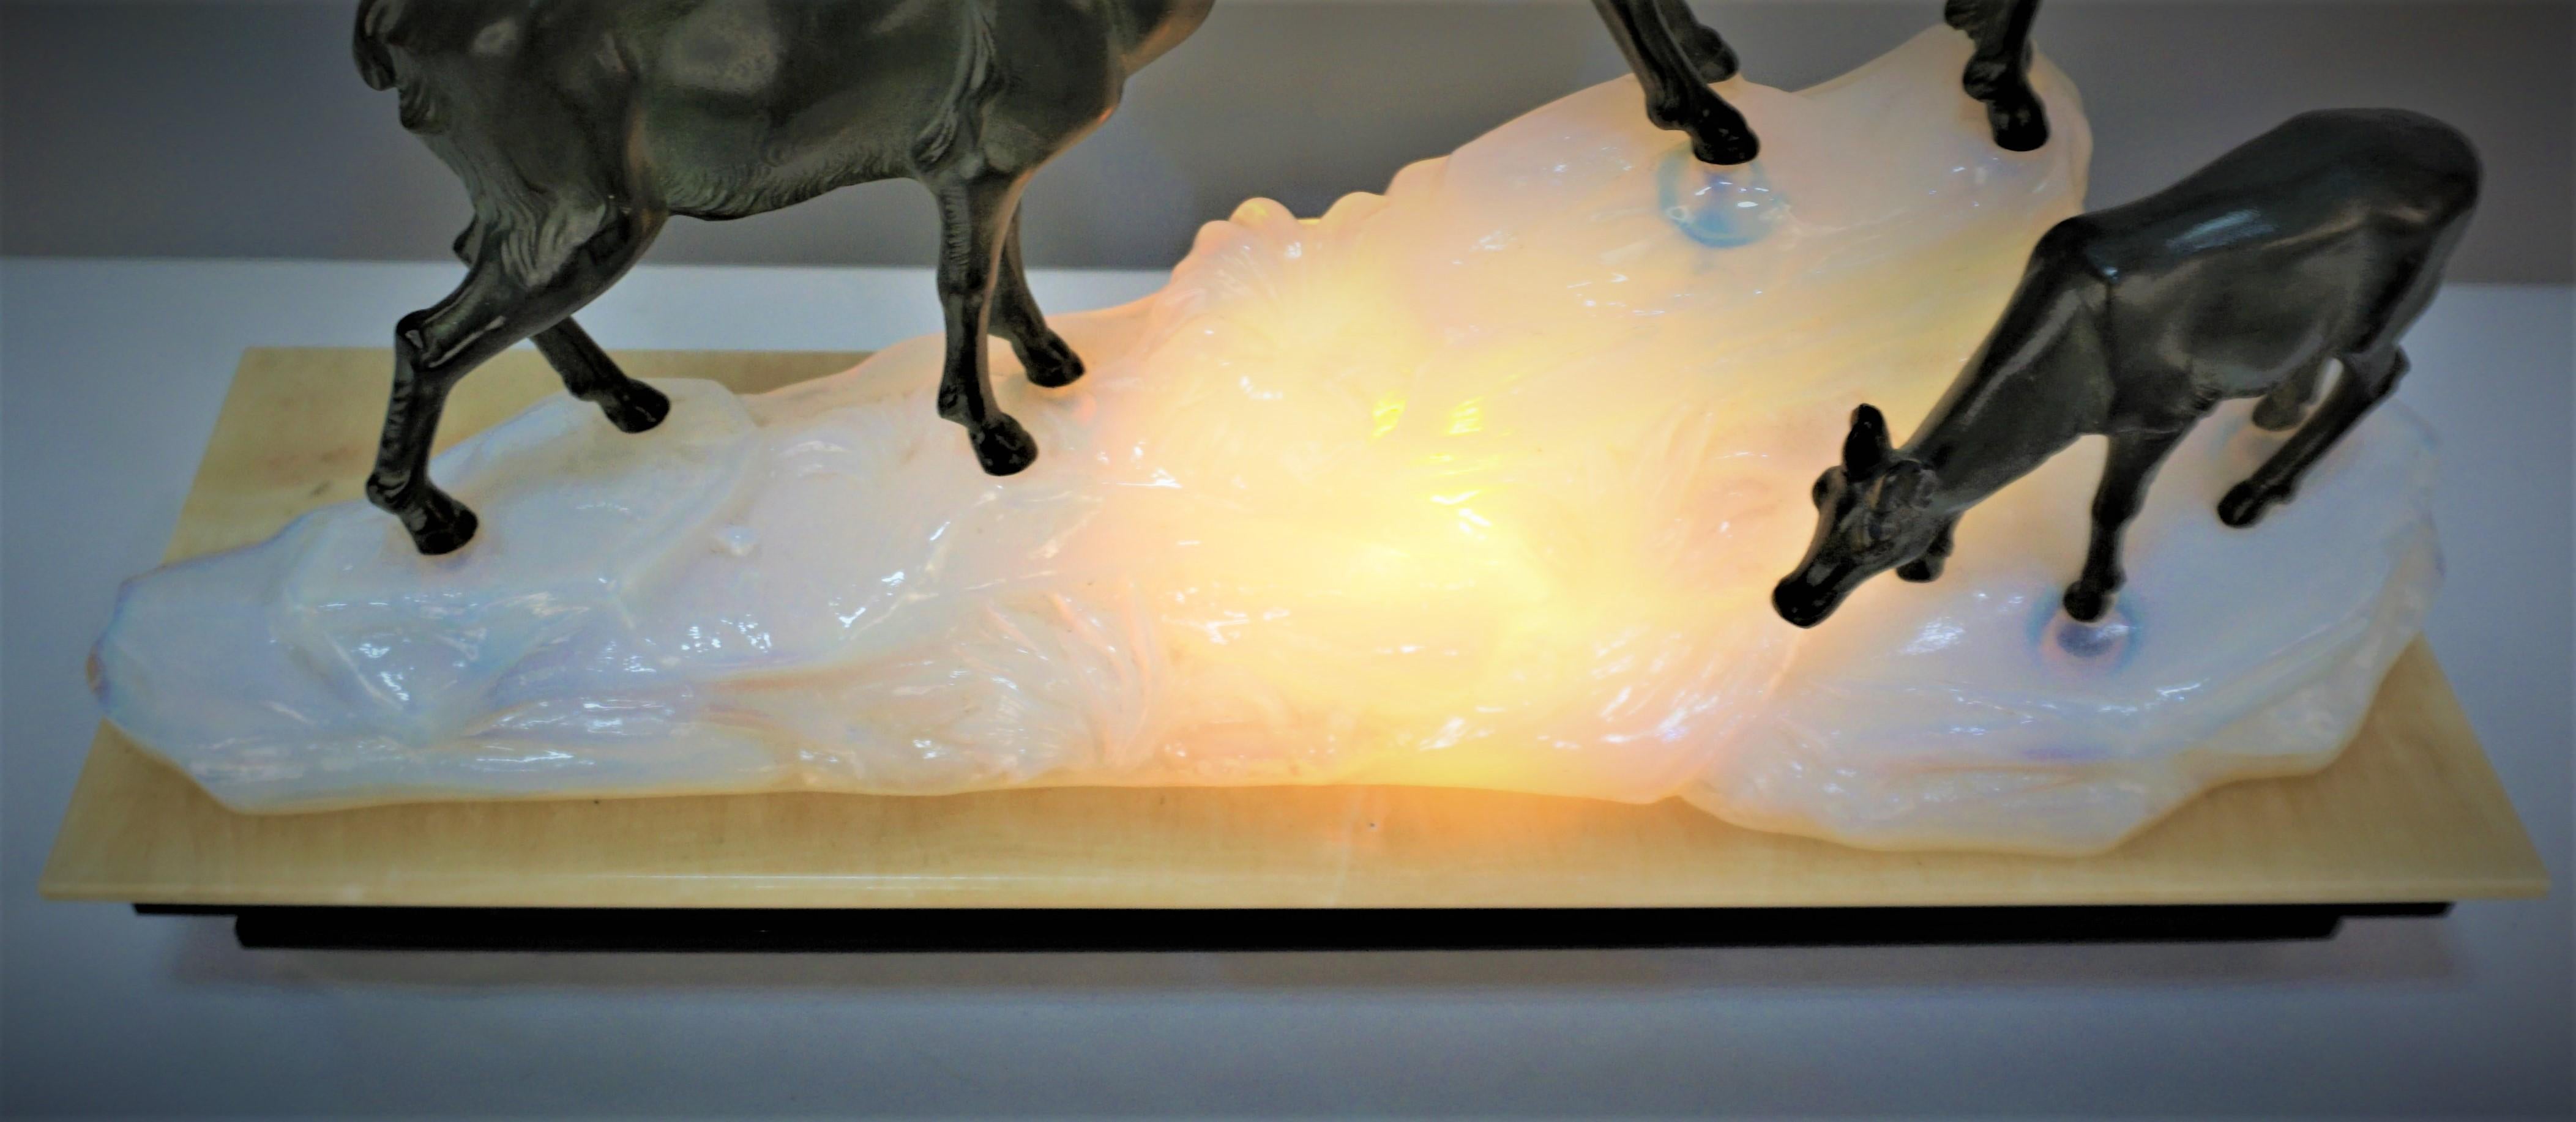 Beautiful Art Deco sculpture lamp, Beige onyx sitting on black marble as base, golden blue opaline glass rocky mountain with light inside and standing antelopes on the top of the rock (metal sculptures might have been commissioned or done by Max le